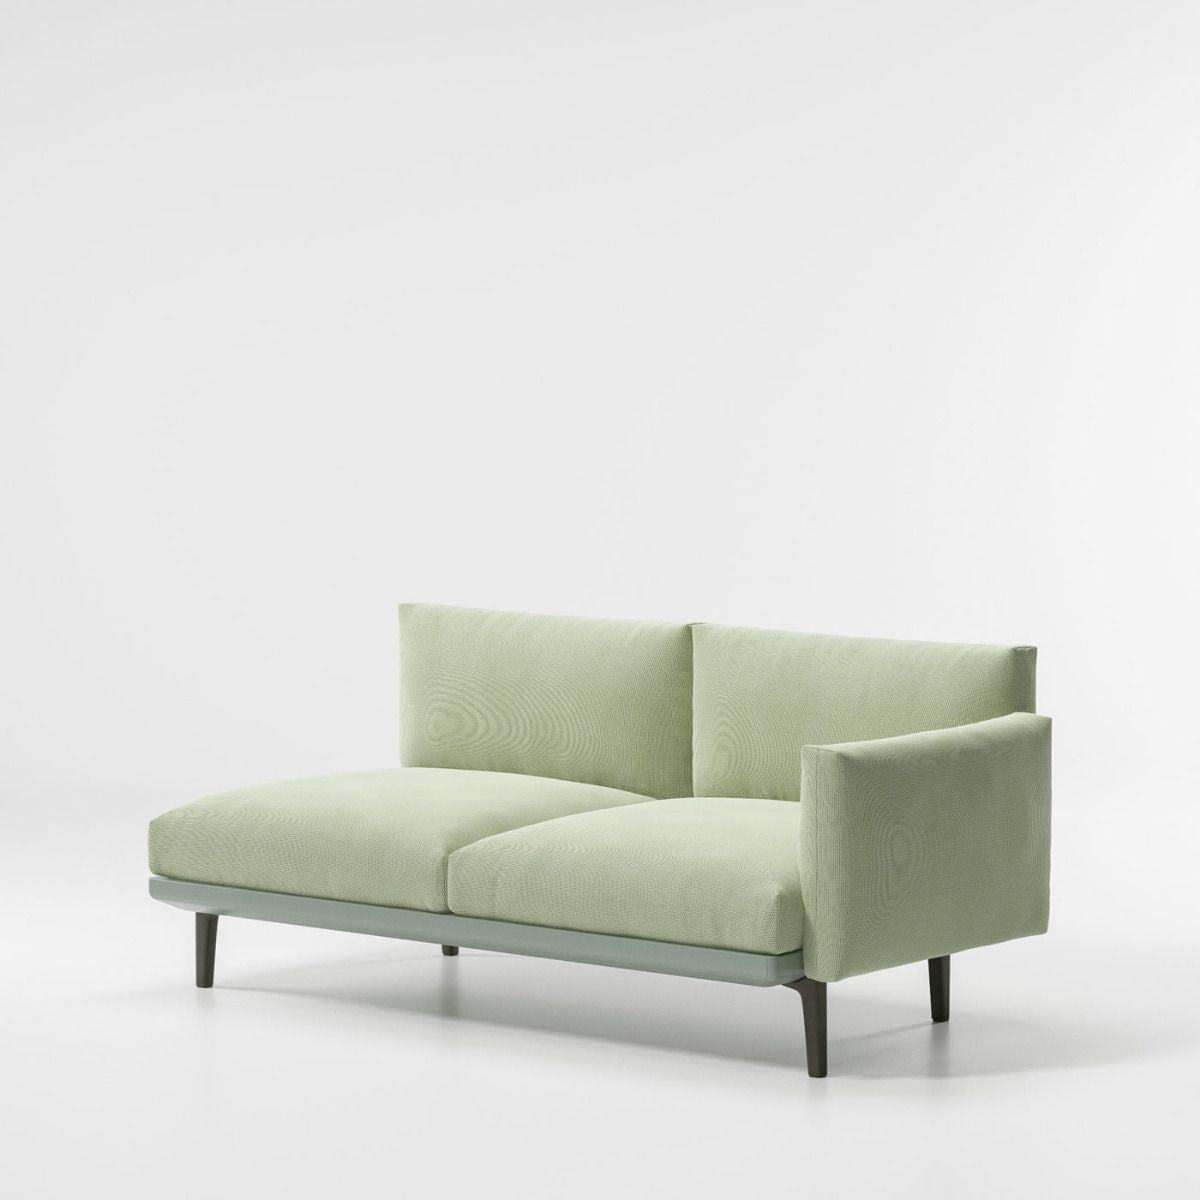 Kettal Boma Right Corner 2-Seater "End"